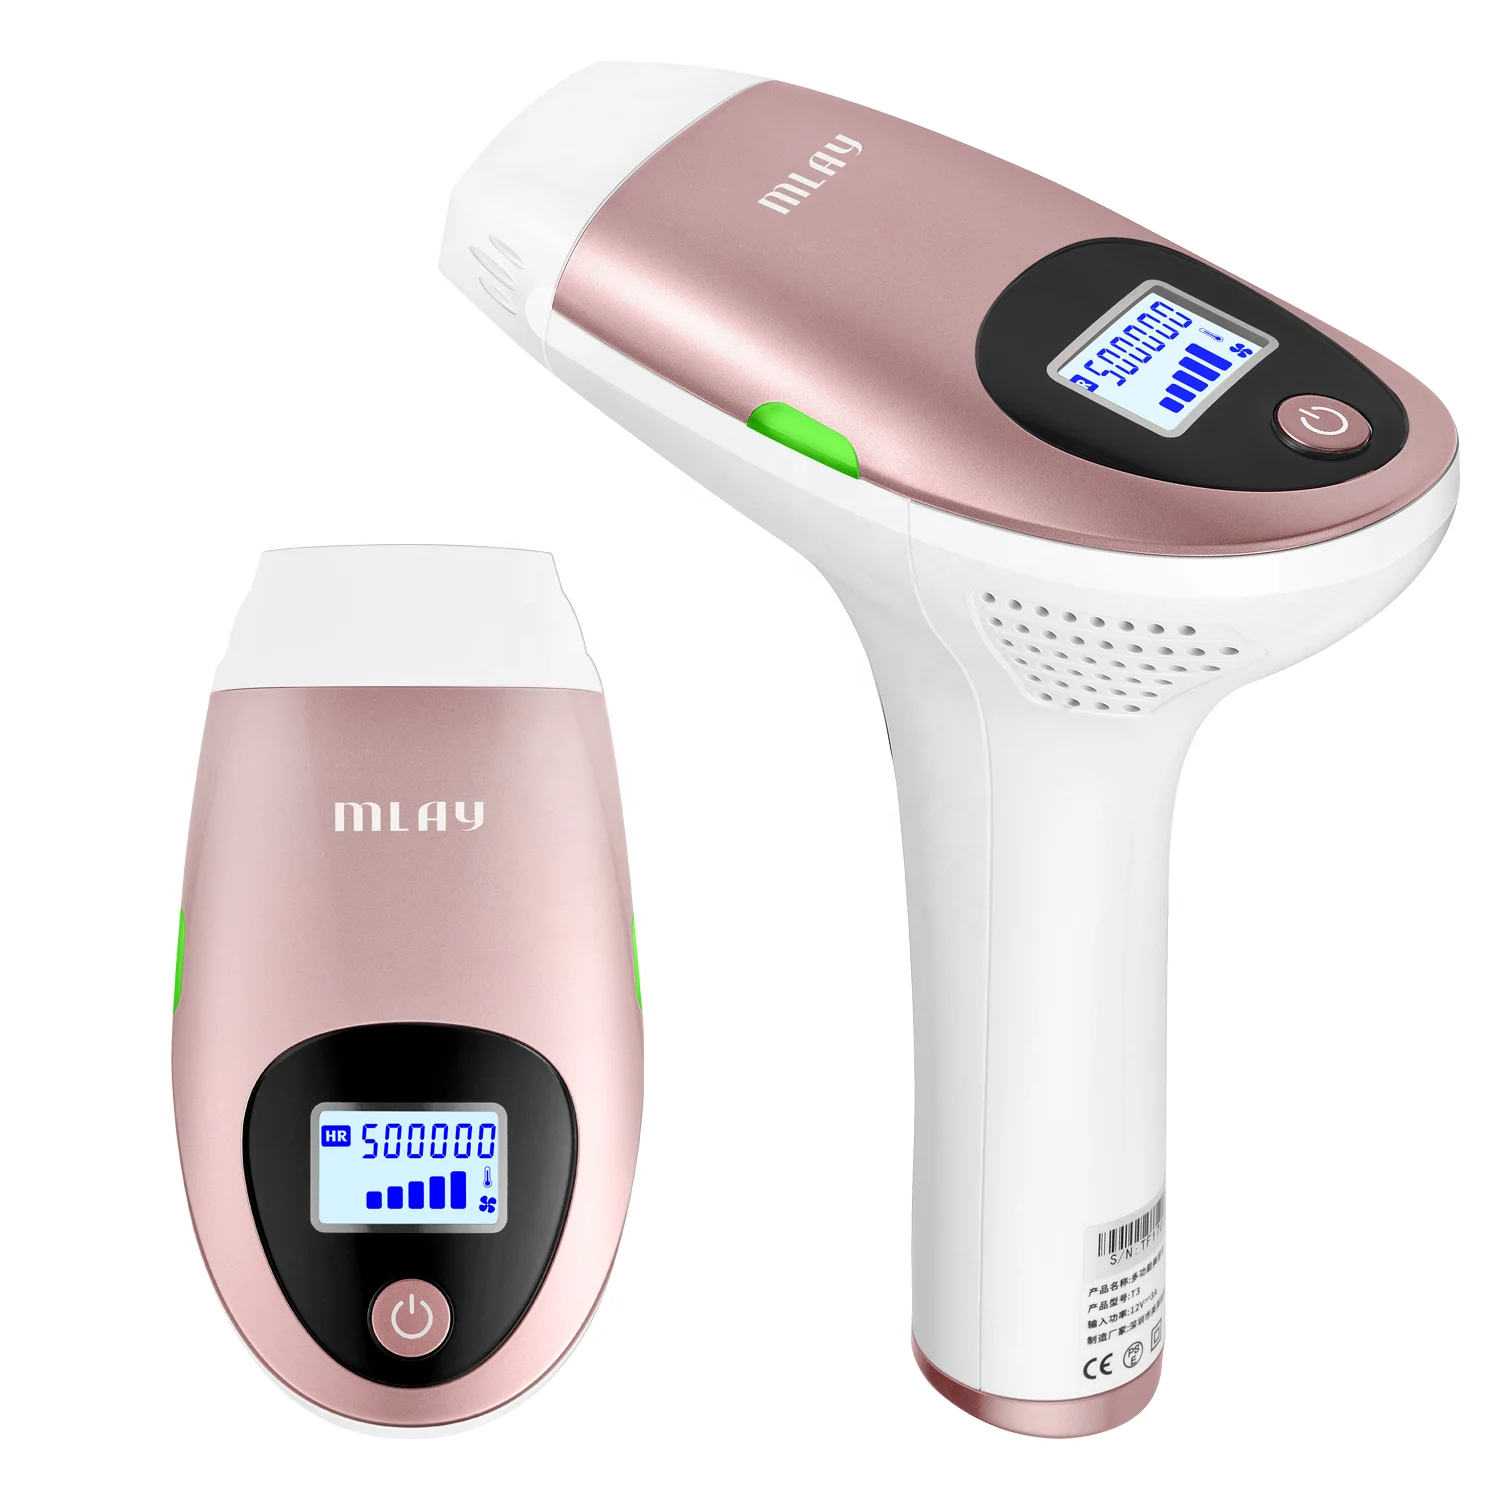 

MLAY T3 Painless Shr Permanent Face and Body IPL Laser Hair Removal Device for Women and Men Haarentfernung Depilation Depilator